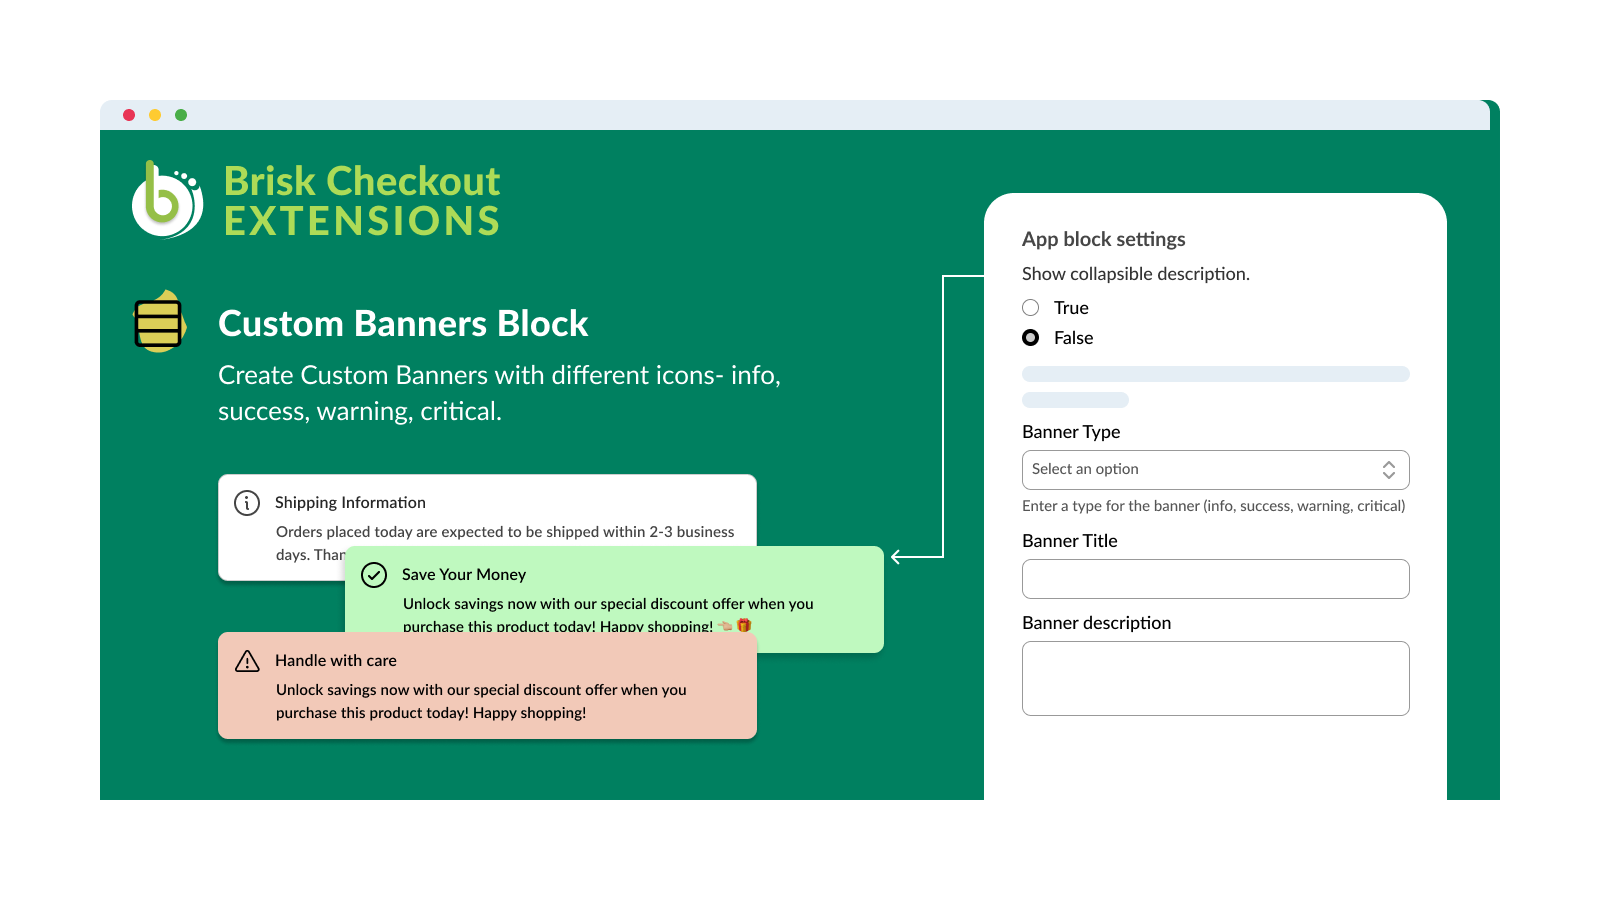 Brisk Checkout Extensions - Custom Banners Block